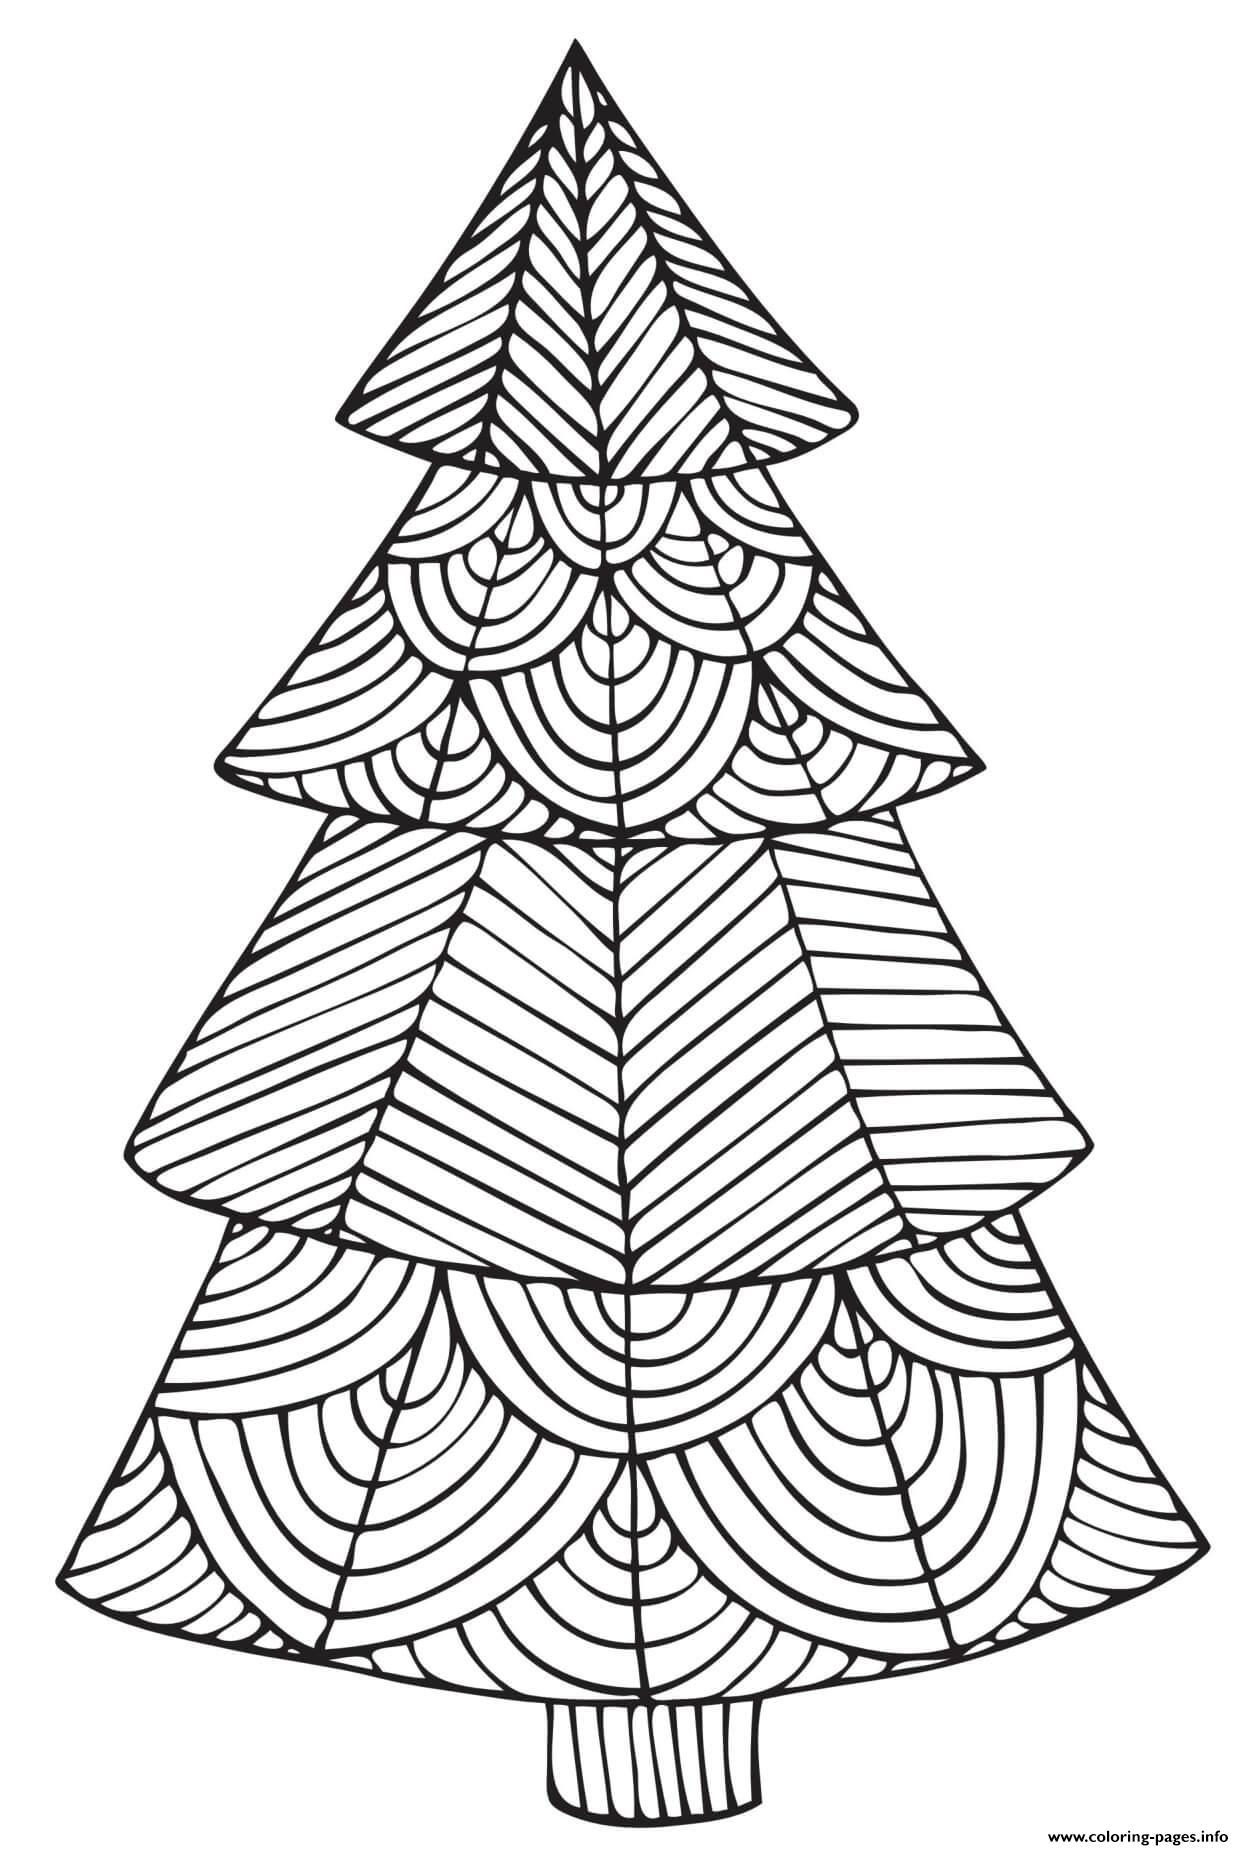 Christmas For Adults Geometric Tree coloring